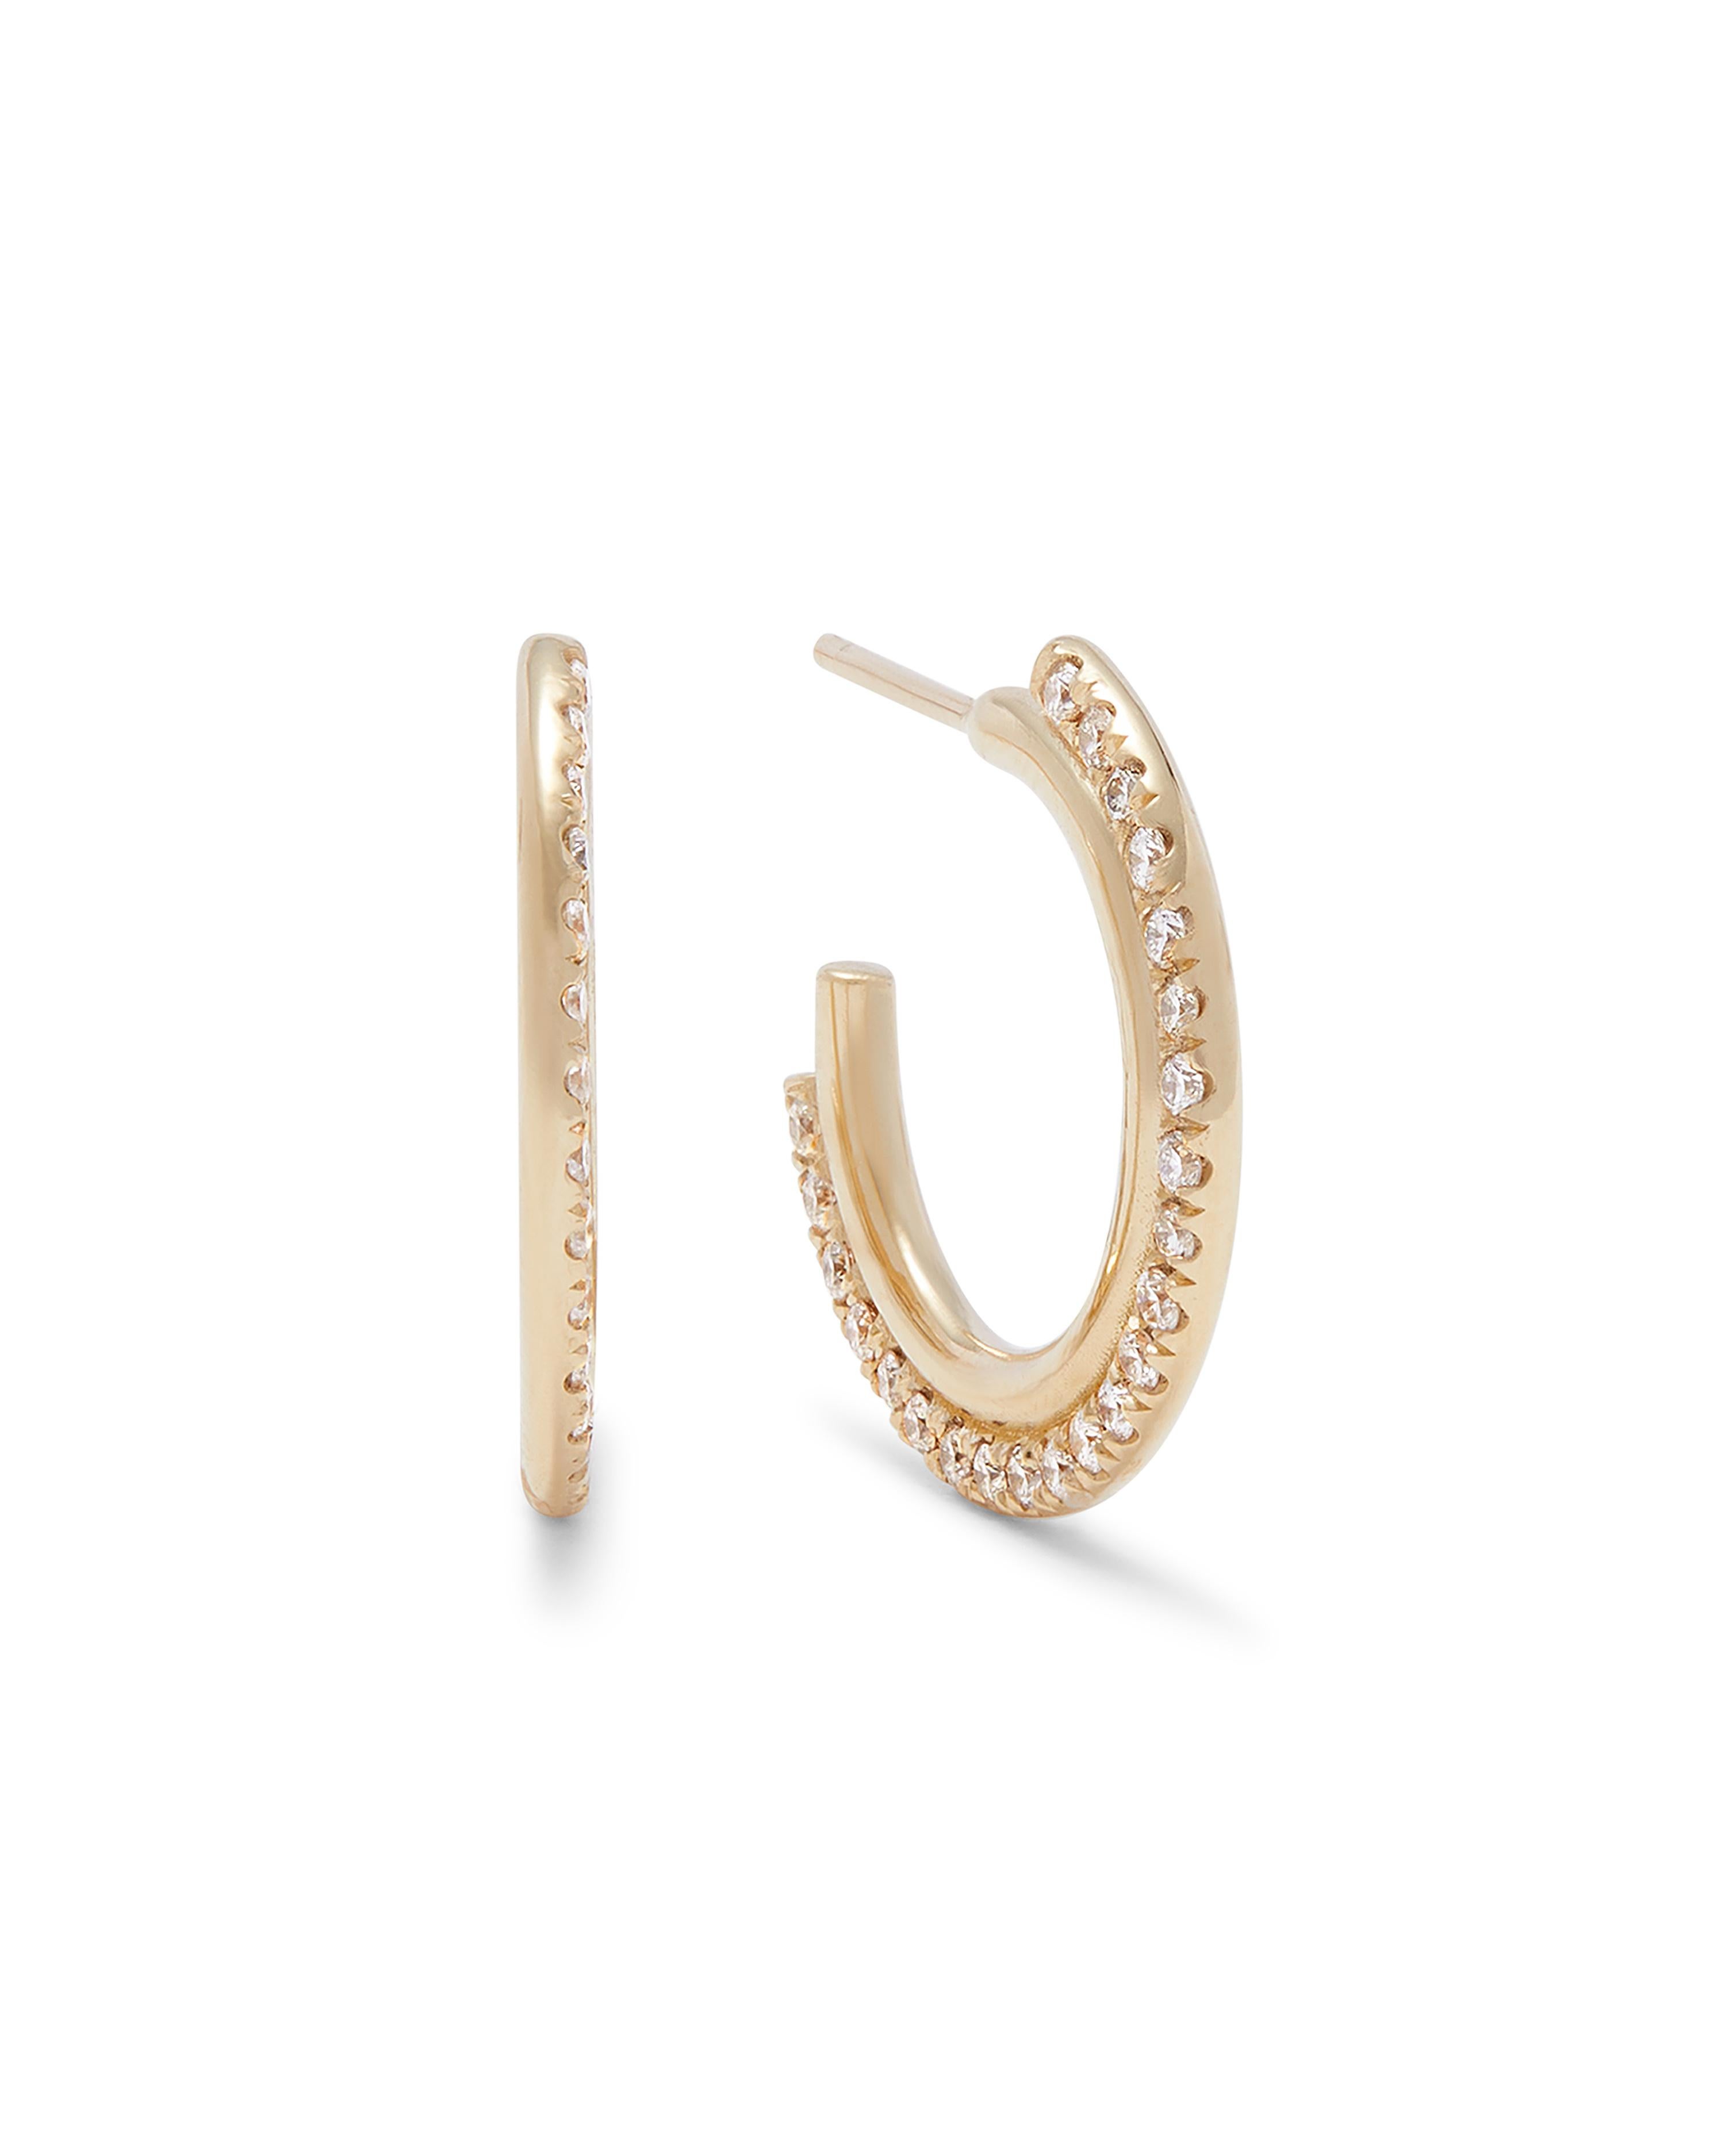 Architectural yet minimal hoop earrings in 14K yellow gold. The hoops feature a rounded band detail set with brilliant cut diamonds. Their petite size makes them ideal for everyday wear while adding just the right amount of sparkle. Total diamond